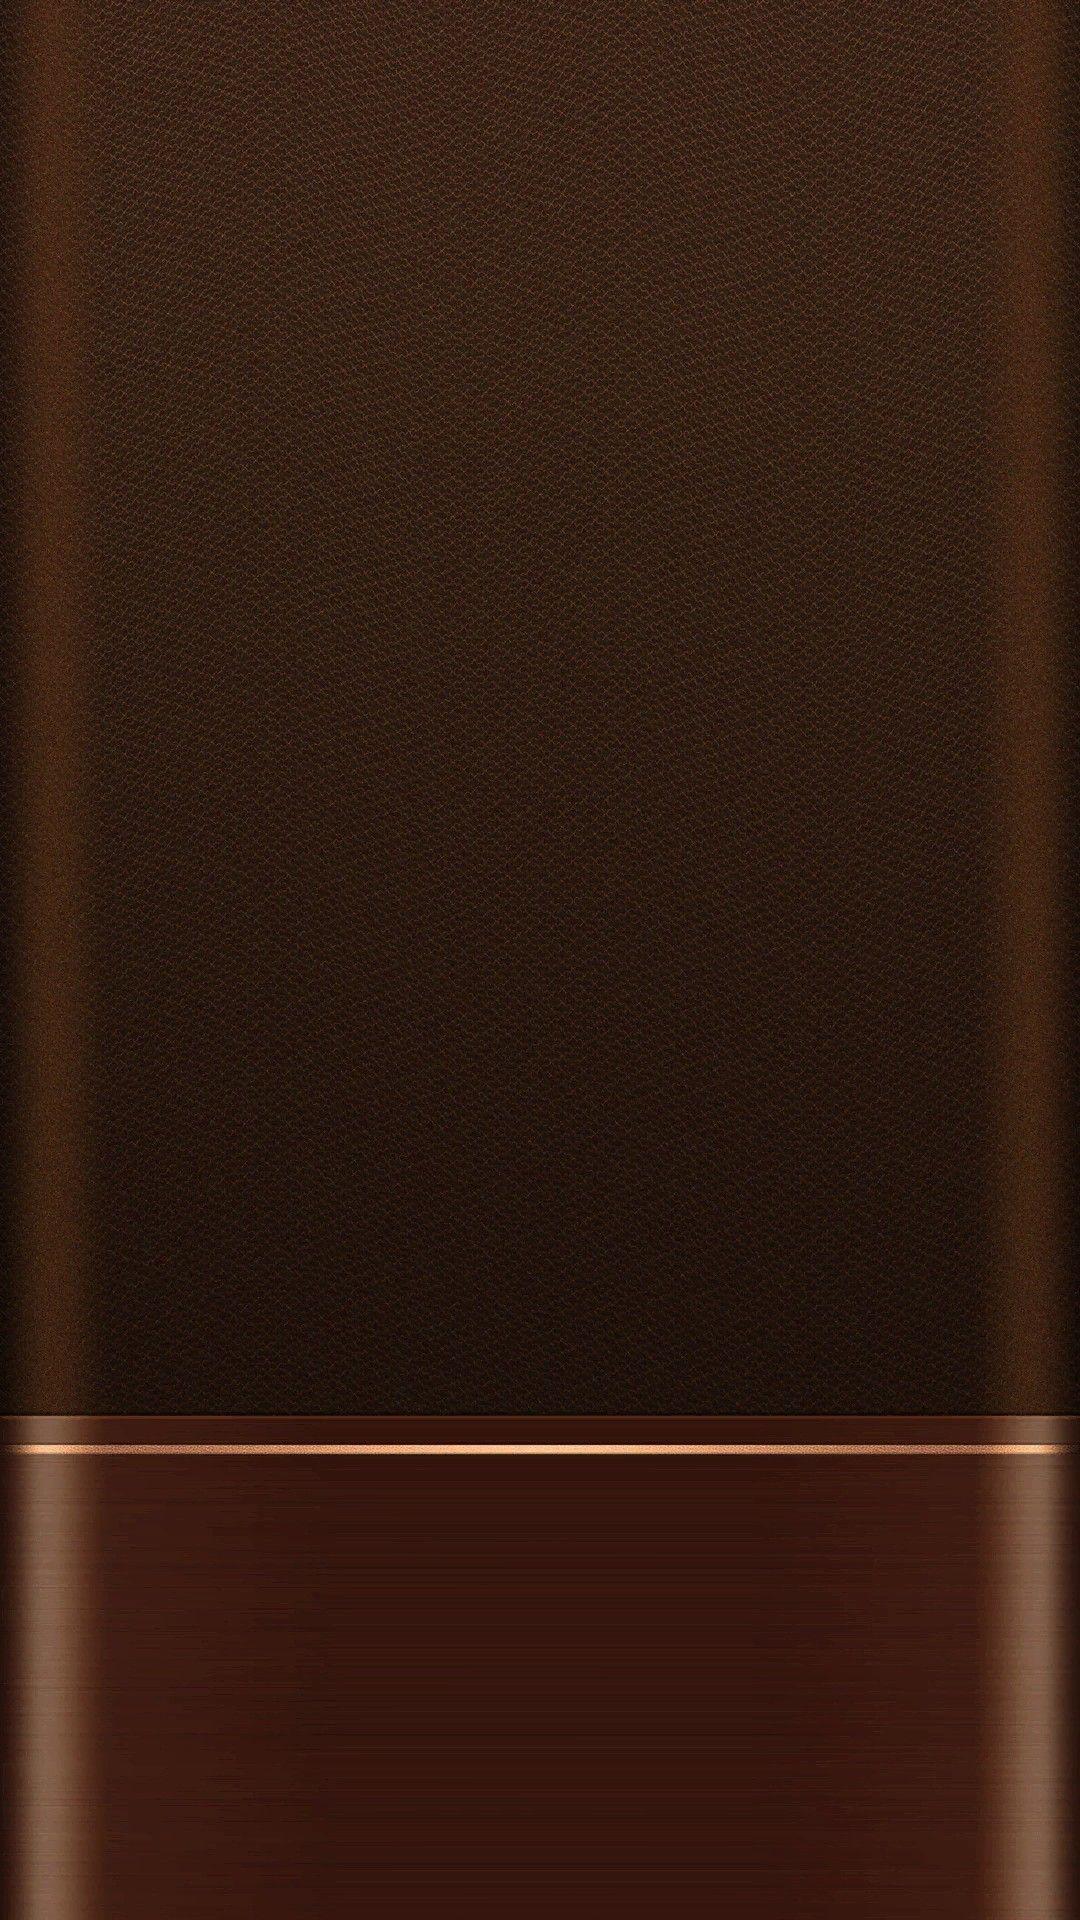 Brown with Gold Trim Wallpaper. Abstract iphone wallpaper, Phone wallpaper patterns, Samsung wallpaper